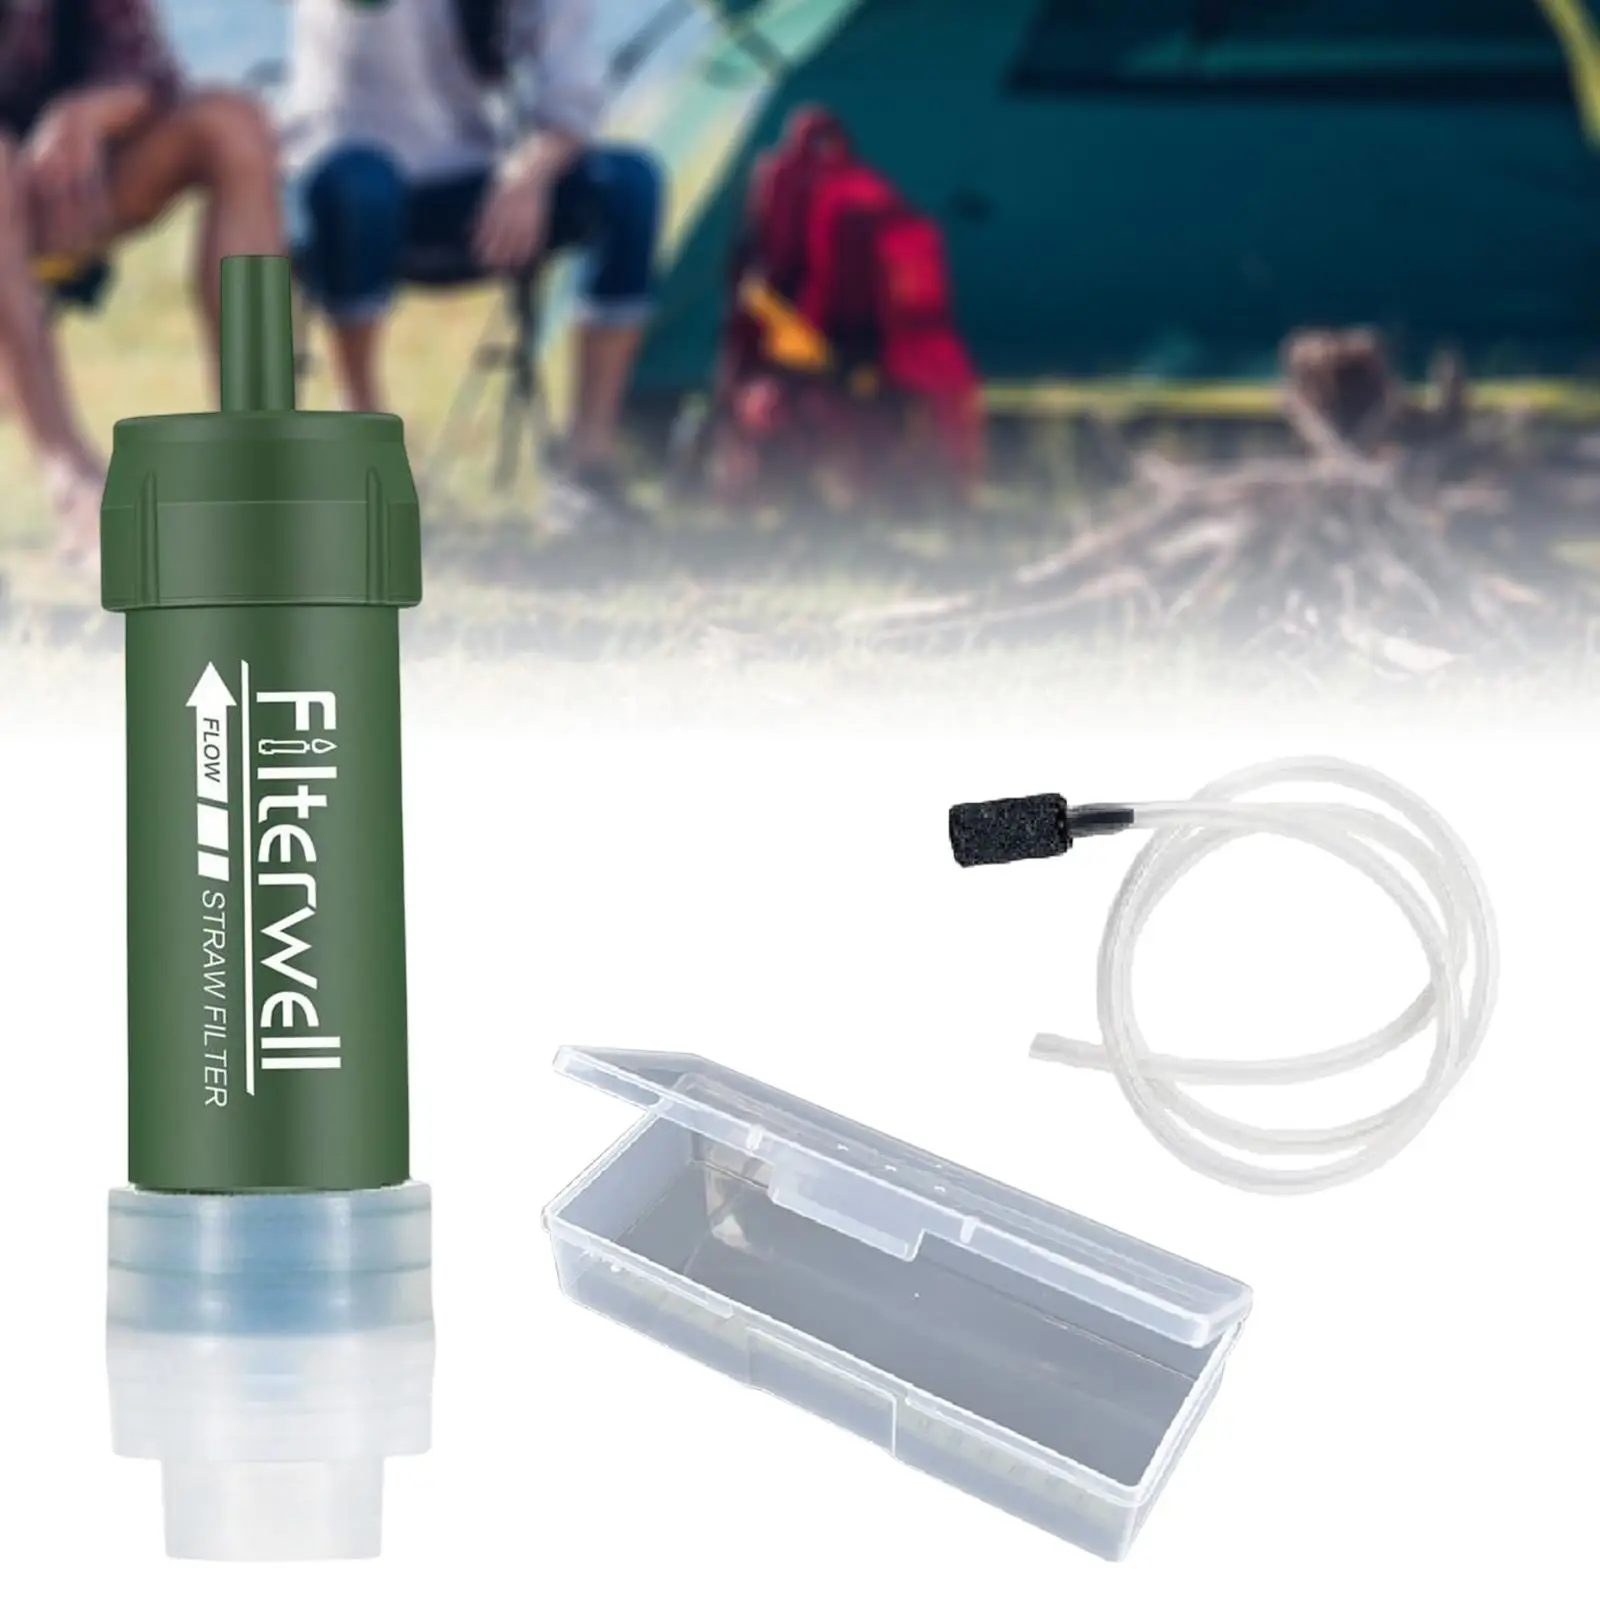 Water Filter Straw Camping Survival Purifier Drinking Travel Emergency Kits